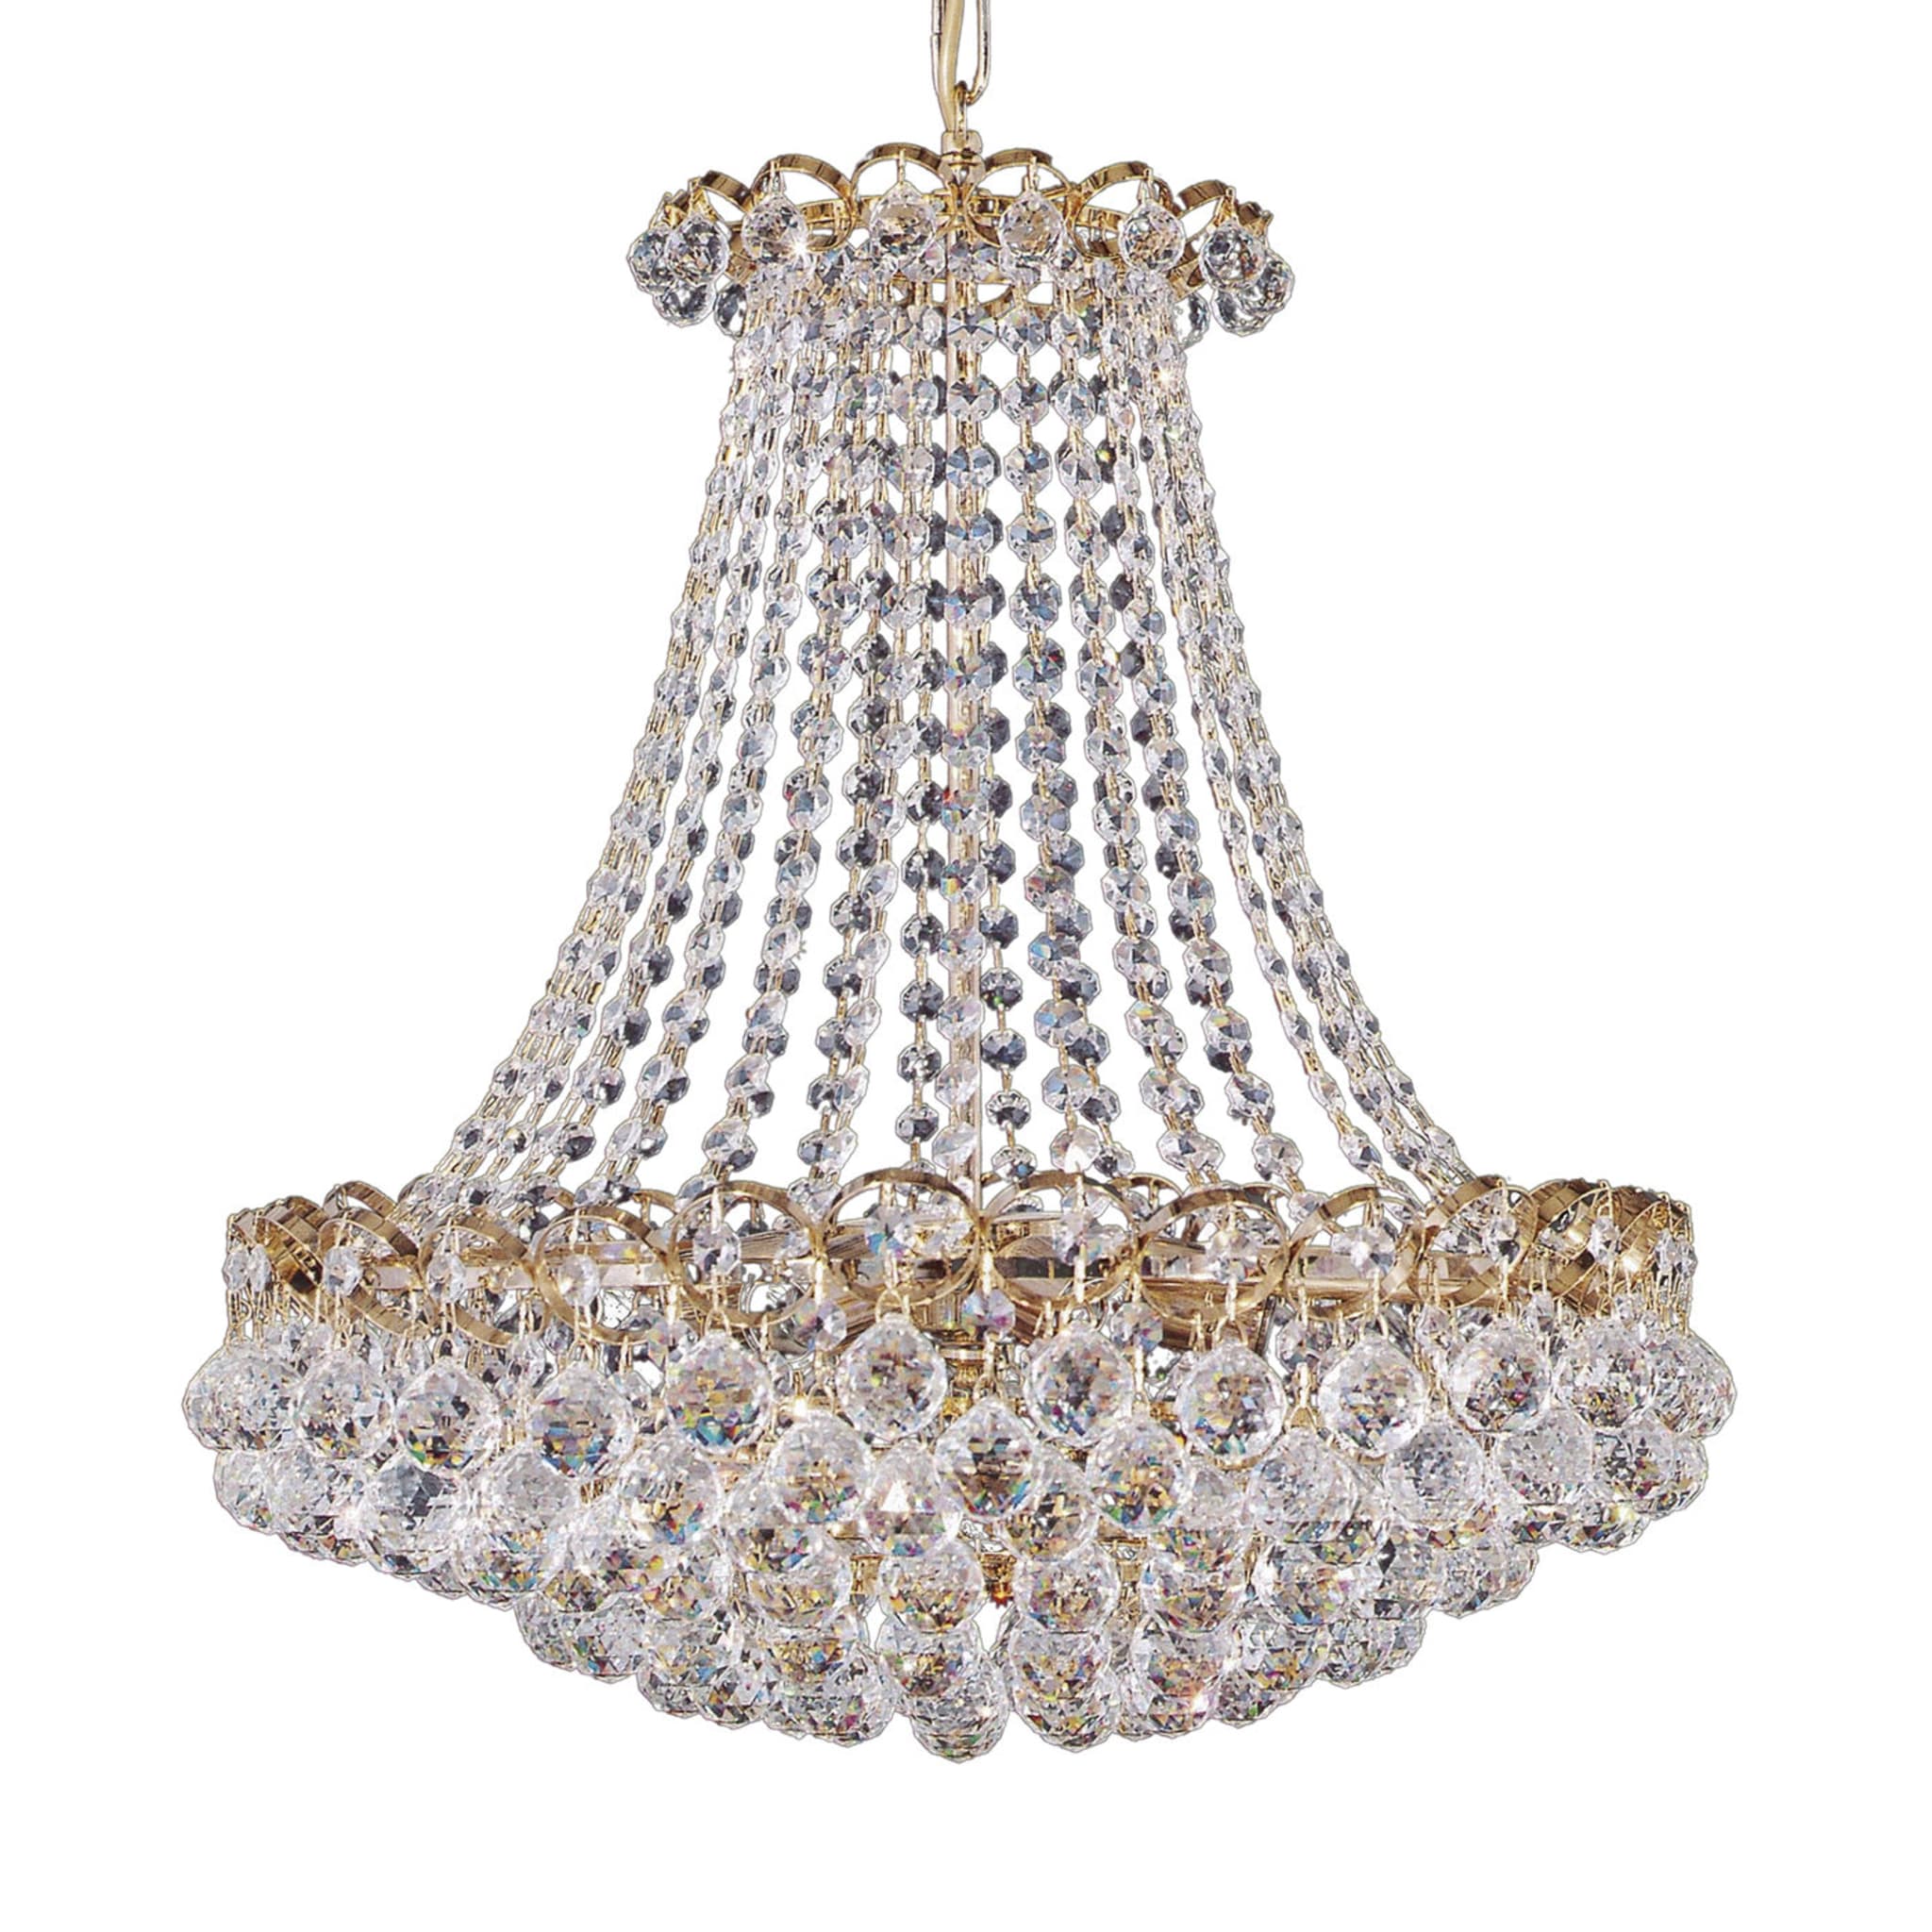 Impero 16-Light Chandelier #2 - Main view